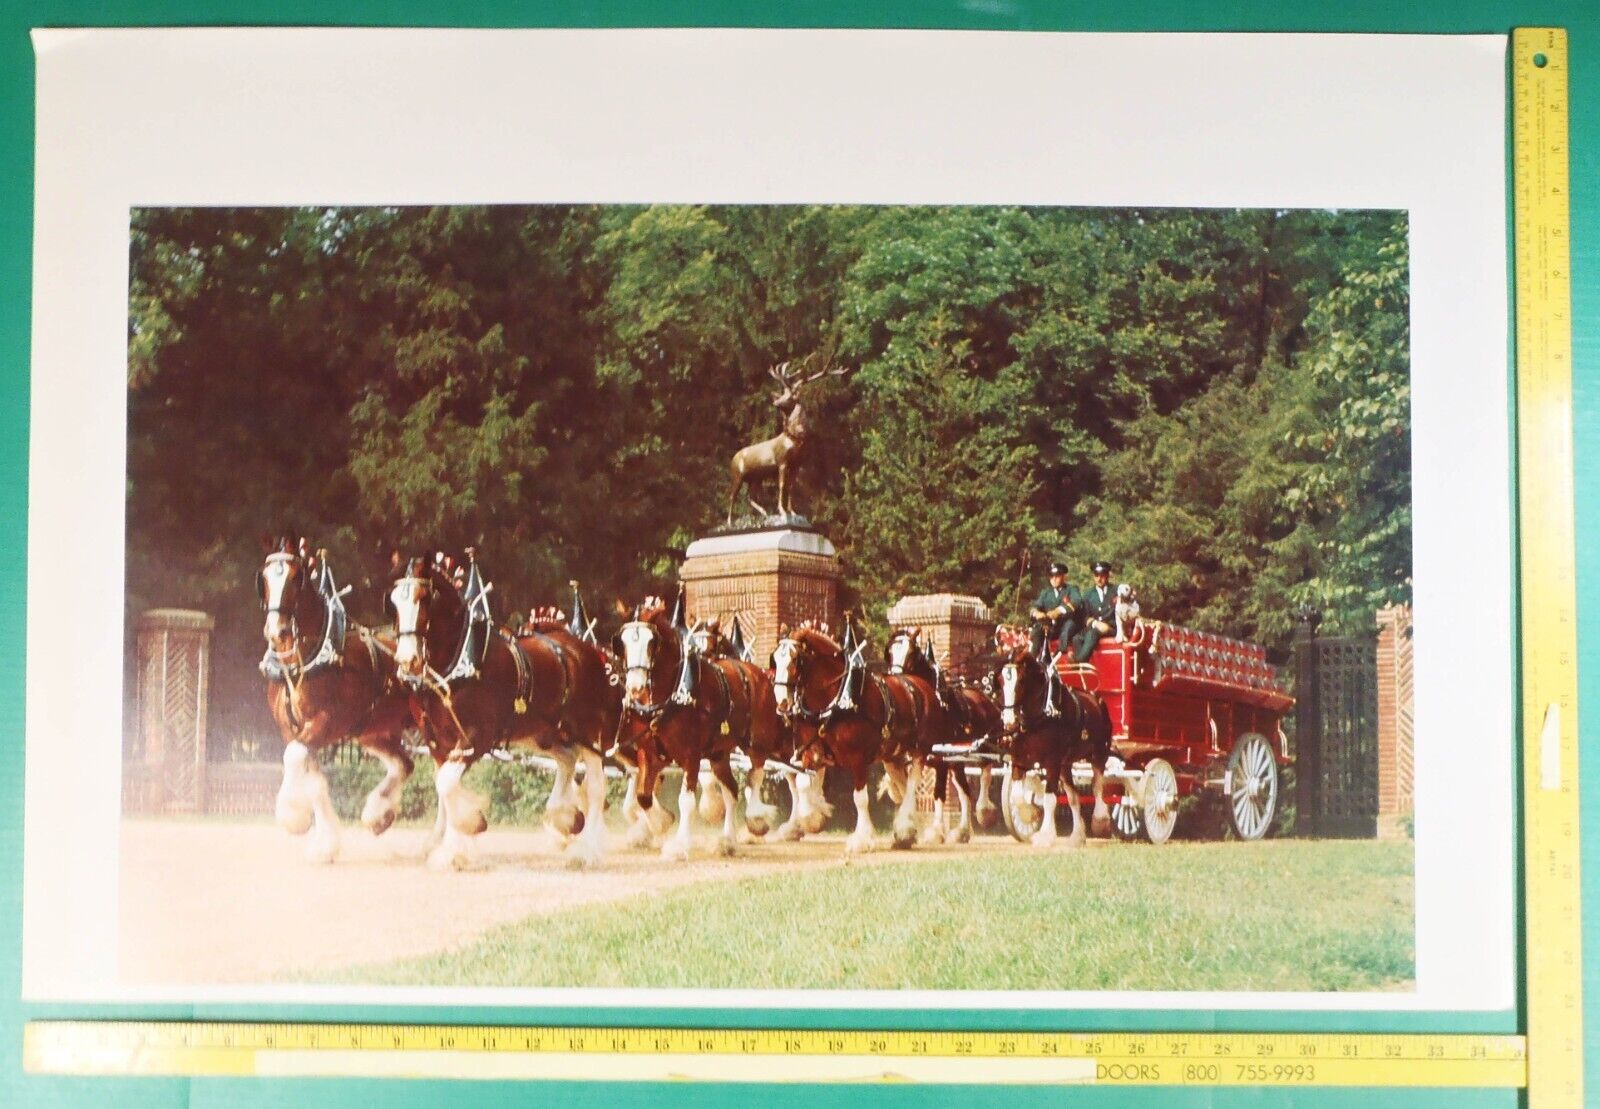 1970s 35x23 UNTRIMMED Photo of BUDWEISER Beer Wagon w/ Dalmatians & Clydesdales Budweiser